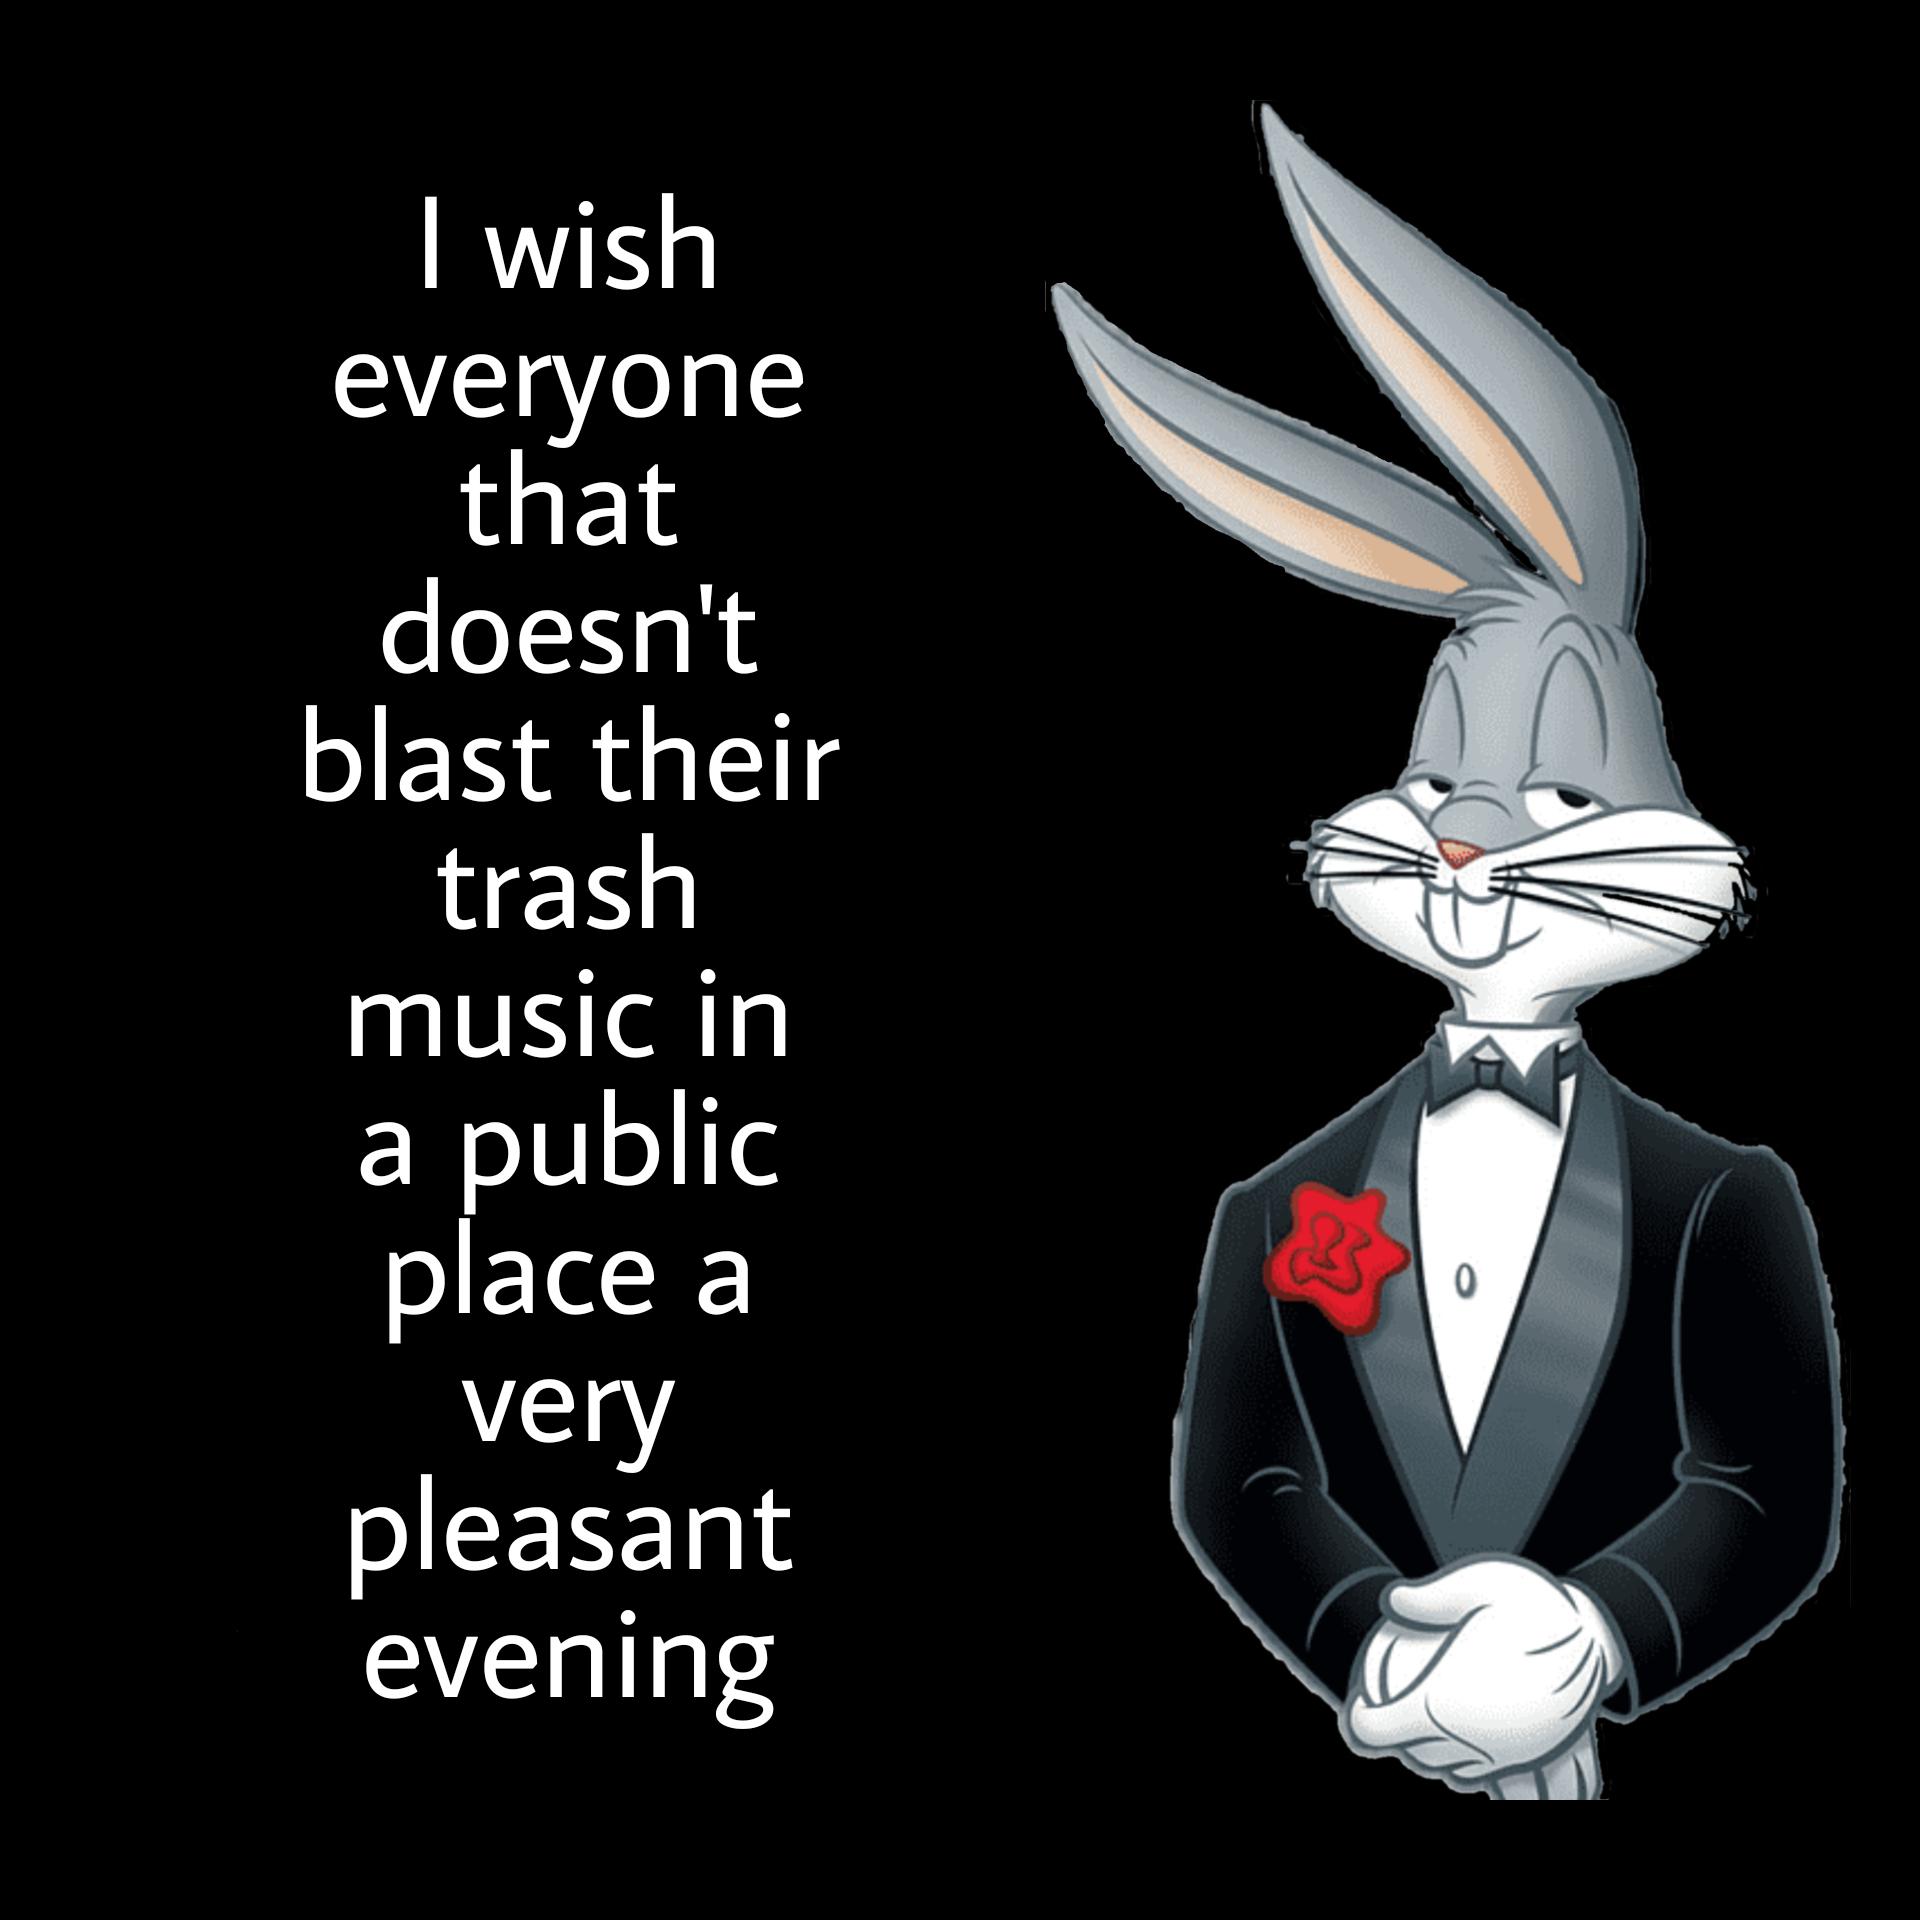 bugs bunny i wish all meme template - I wish everyone that doesn't blast their trash music in a public place a very pleasant evening a 0